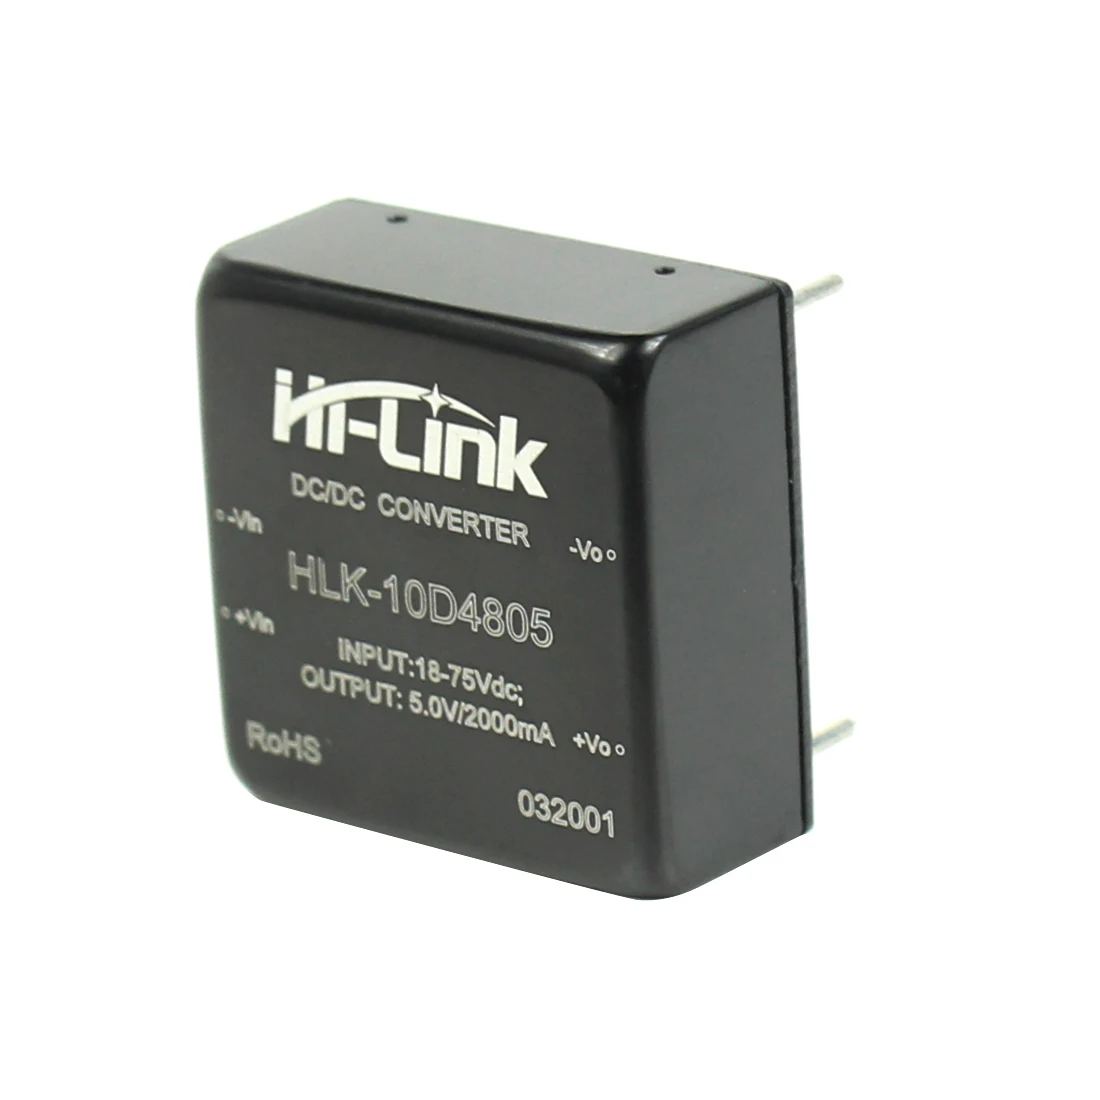 

2 PCS HLK-10D4805 48V to 5V2A10W DC Isolated Power Module DCDC 4: 1 Wide Woltage Input Converter